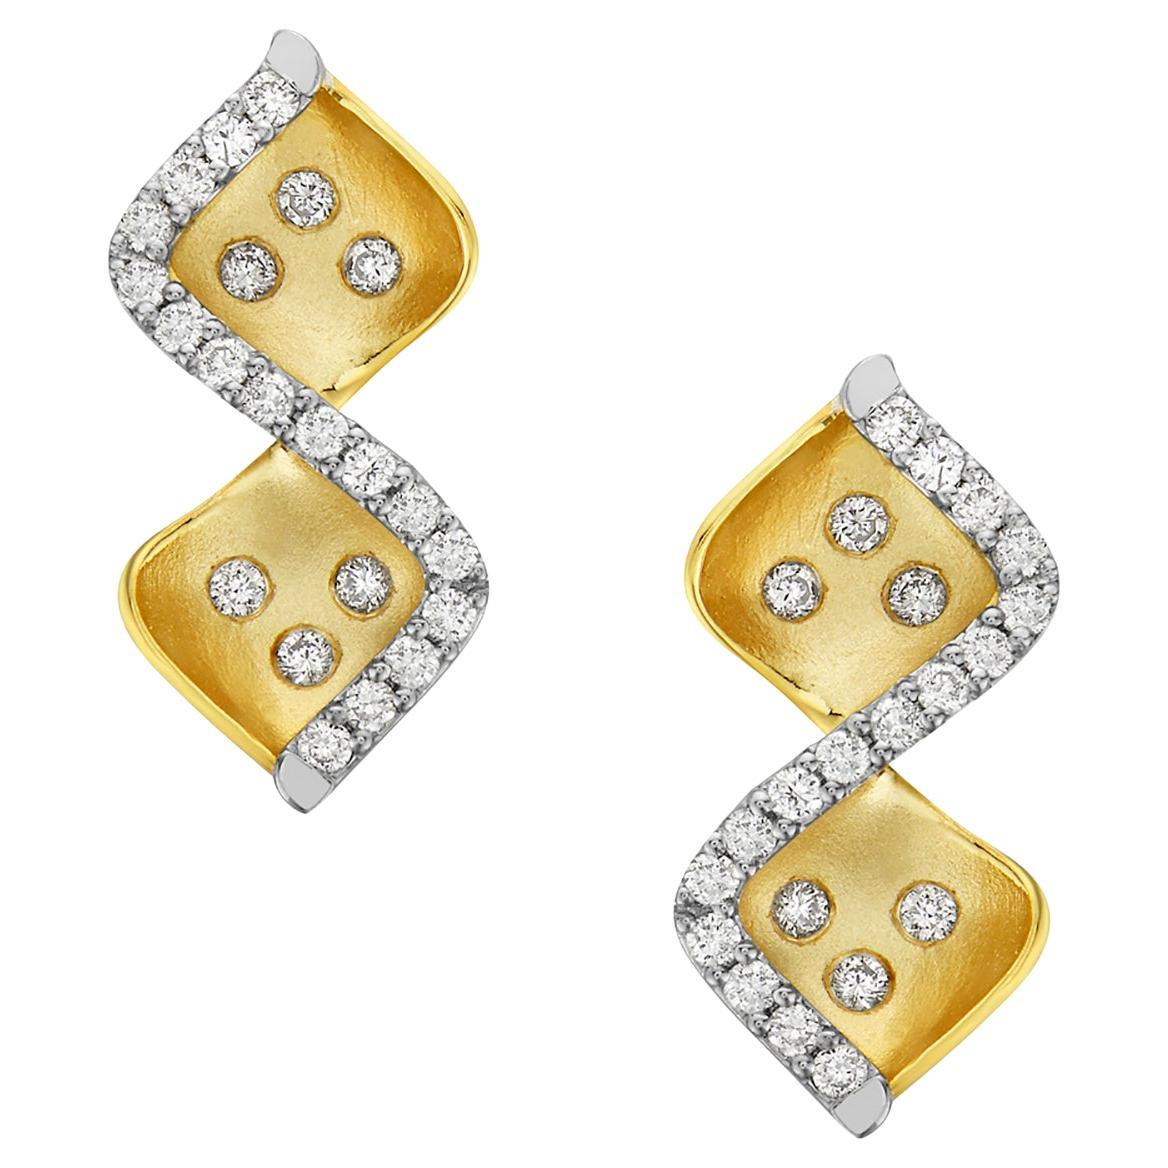 14k Yellow Gold Illusional Zig Zag Shaped Earrings with Diamonds on Border For Sale